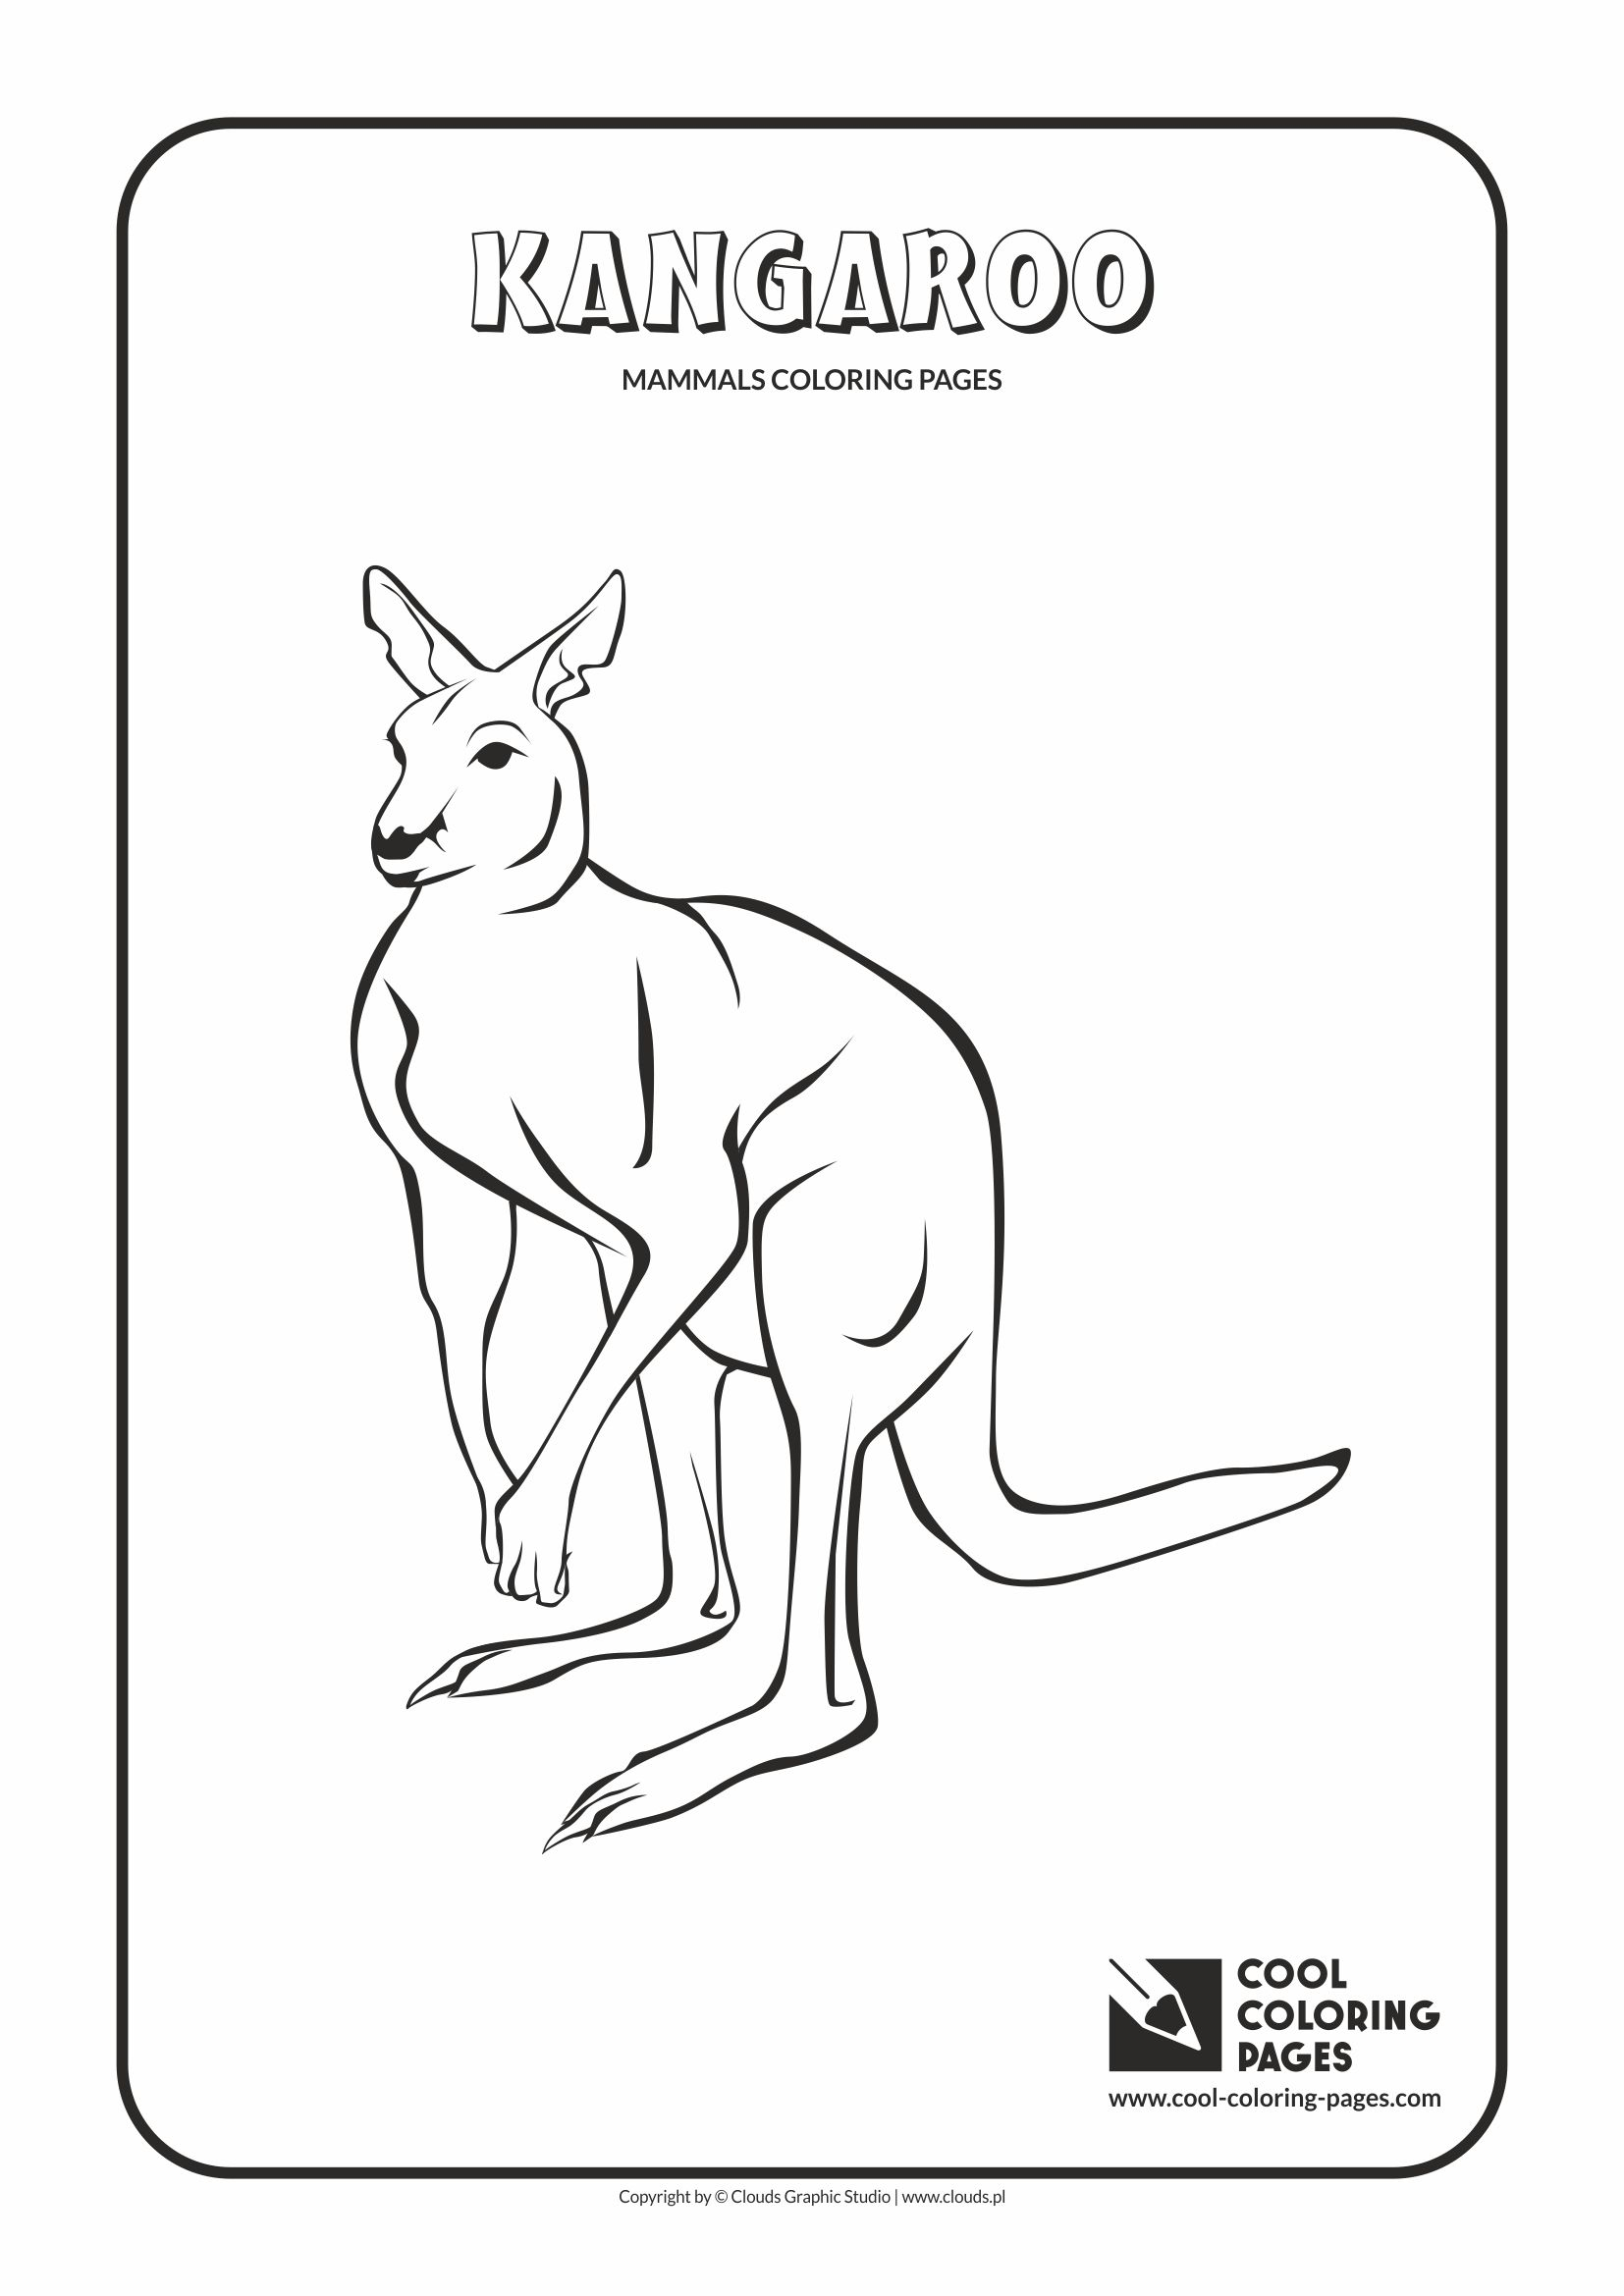 Kangaroo Color Page Cool Coloring Pages Mammals Coloring Pages Cool Coloring Pages